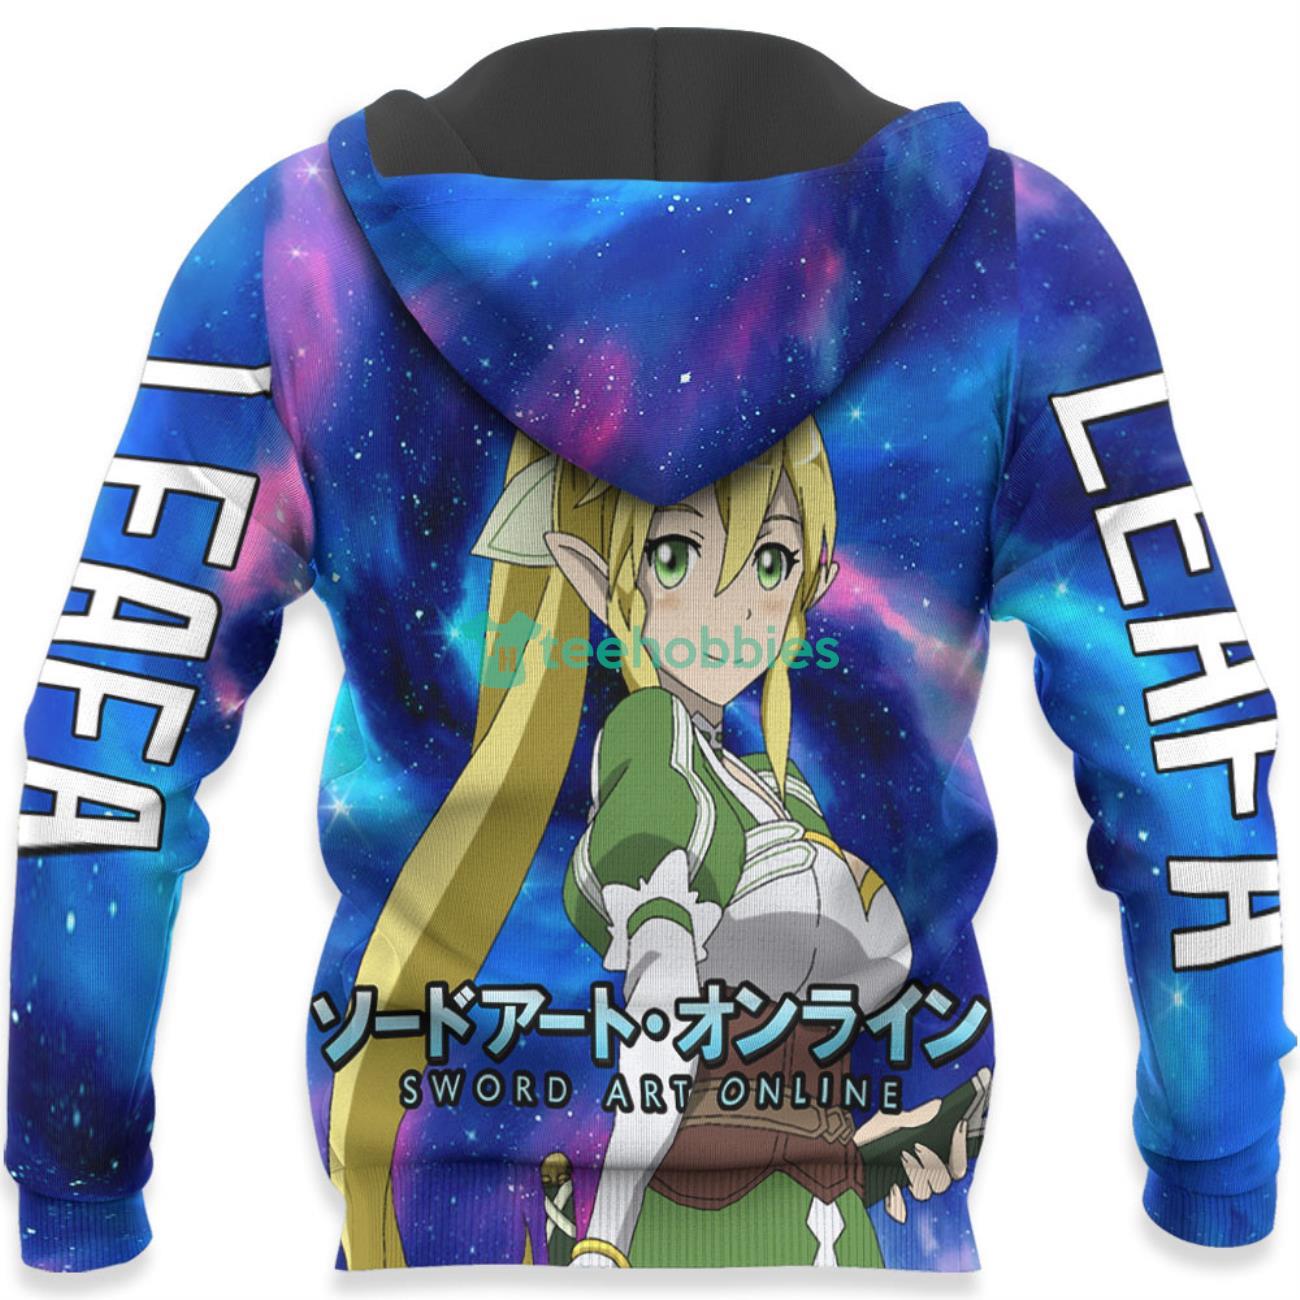 Leafa All Over Printed 3D Shirt Sword Art Online Custom Anime Fans Product Photo 5 Product photo 2